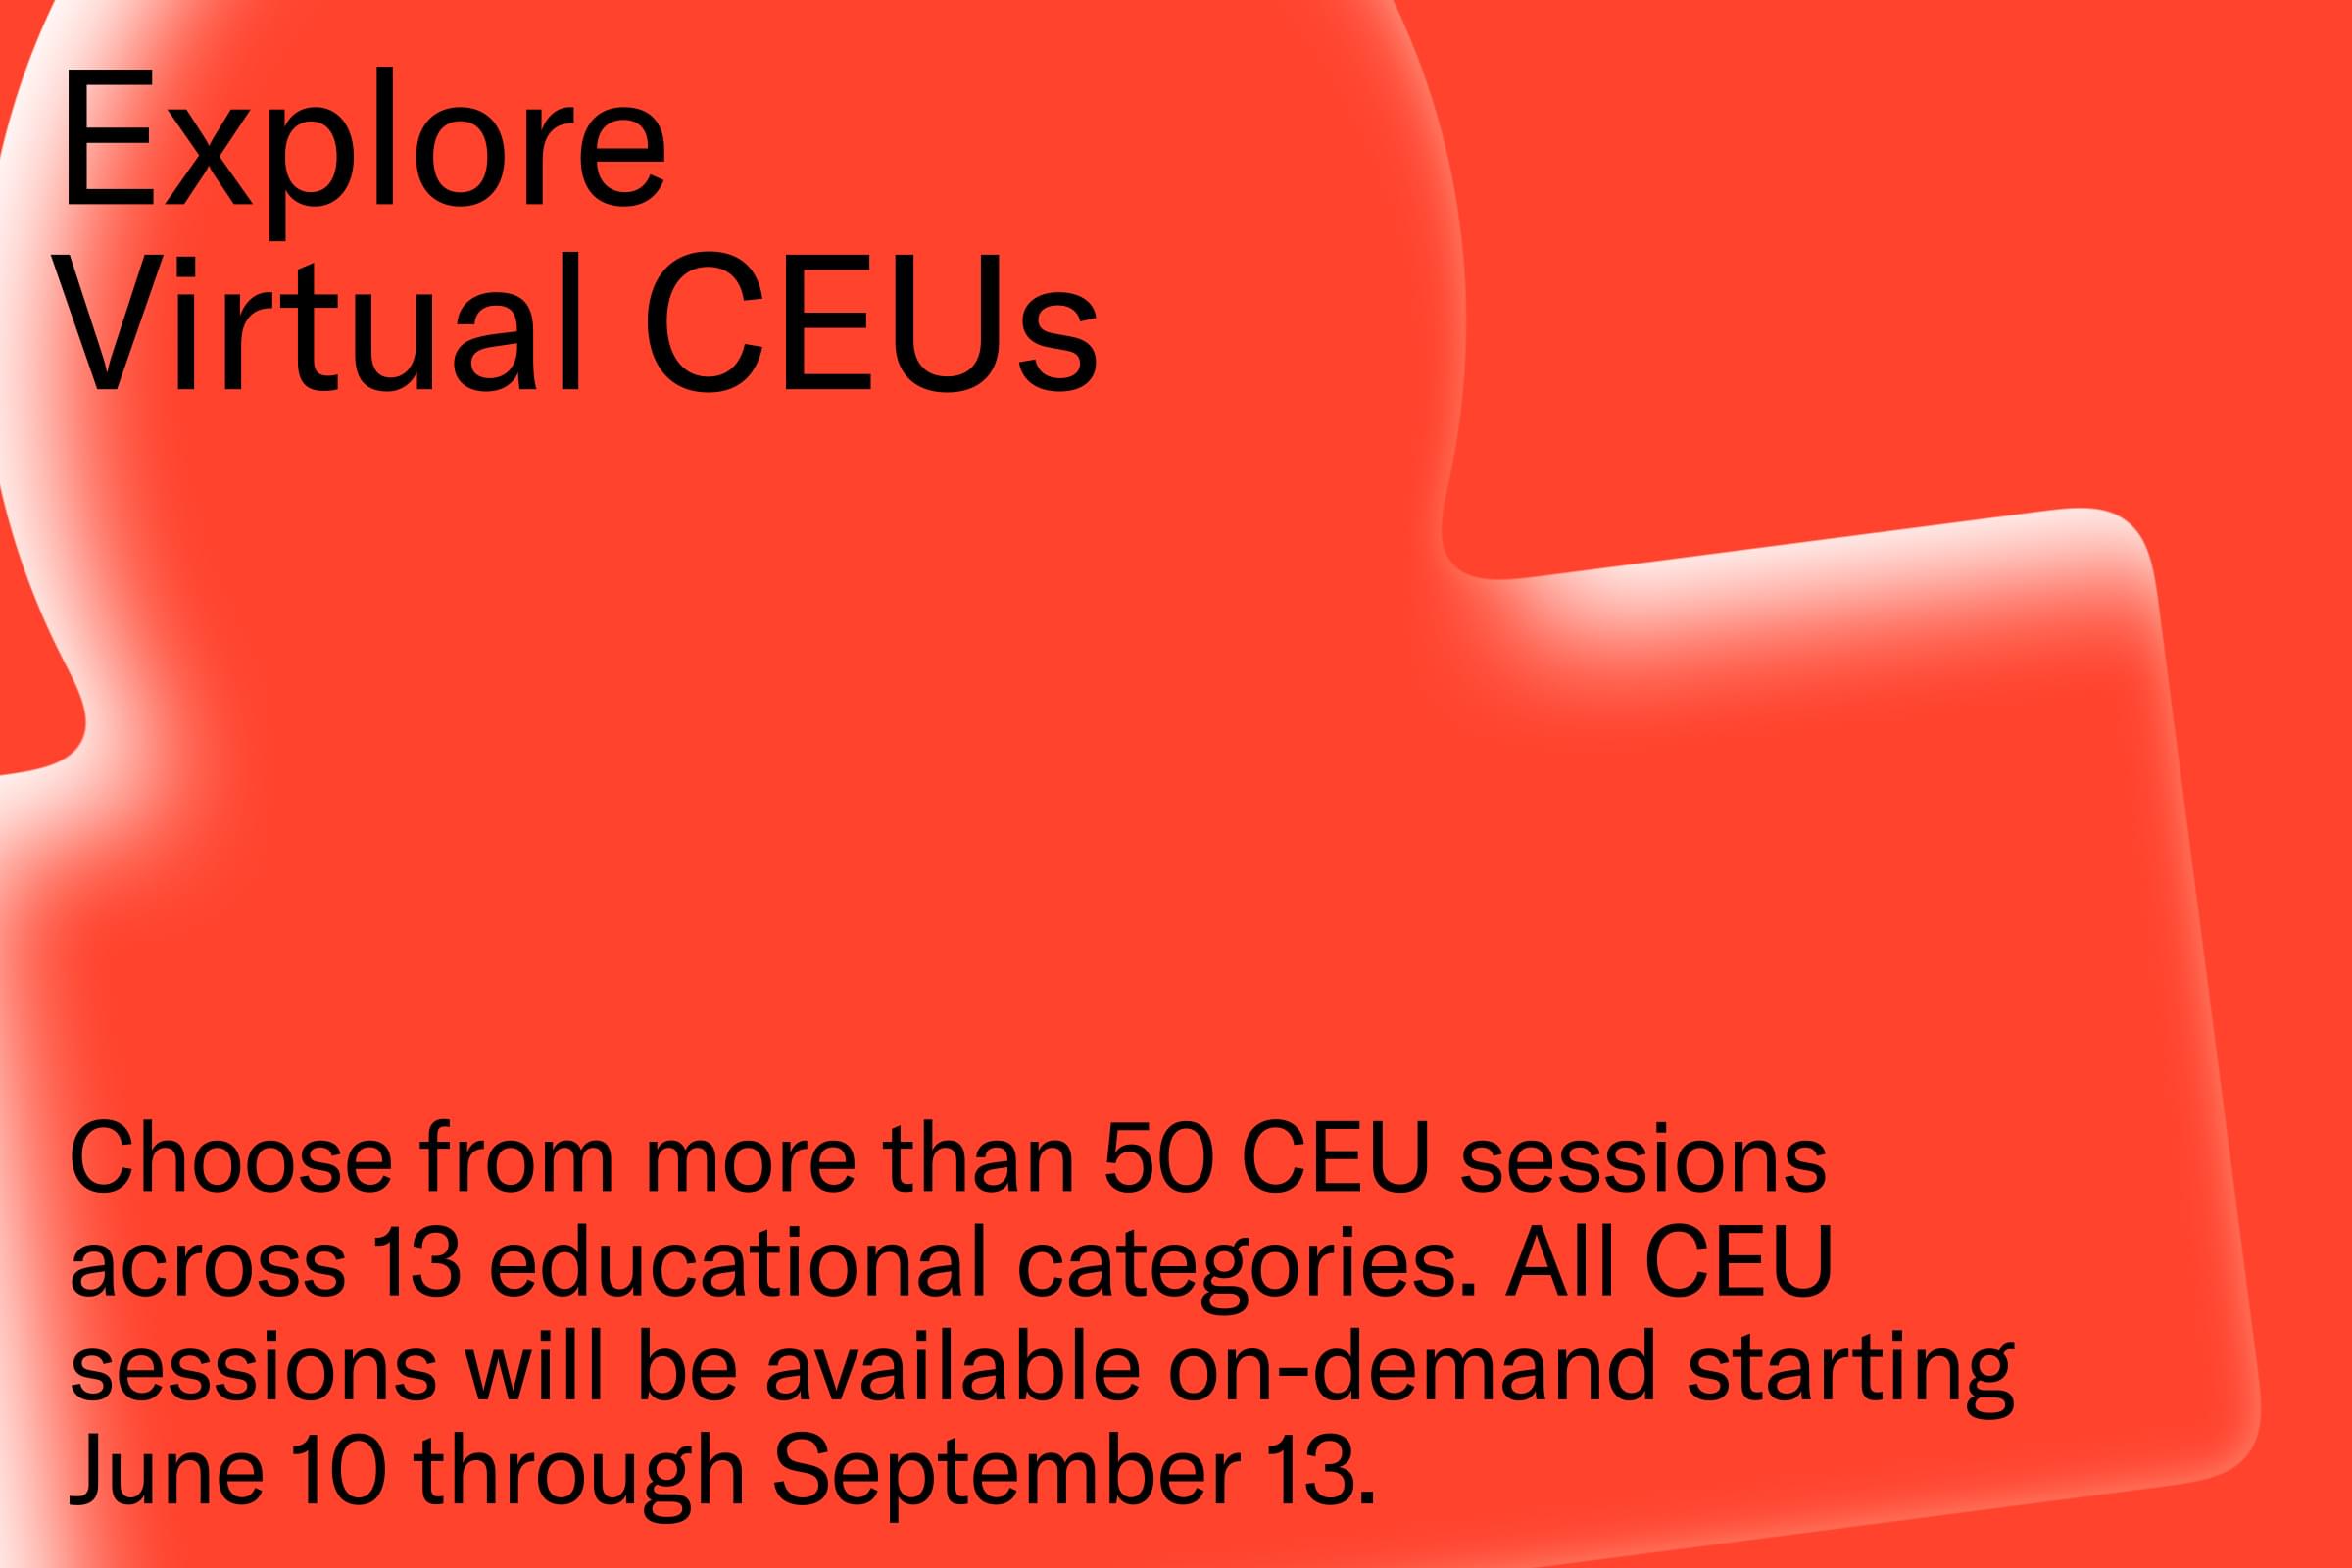 Explore Virtual CEUs - Choose from more than 50 CEU sessions across 13 educational tracks. All CEU sessions will be available on-demand starting June 10 through September 13.